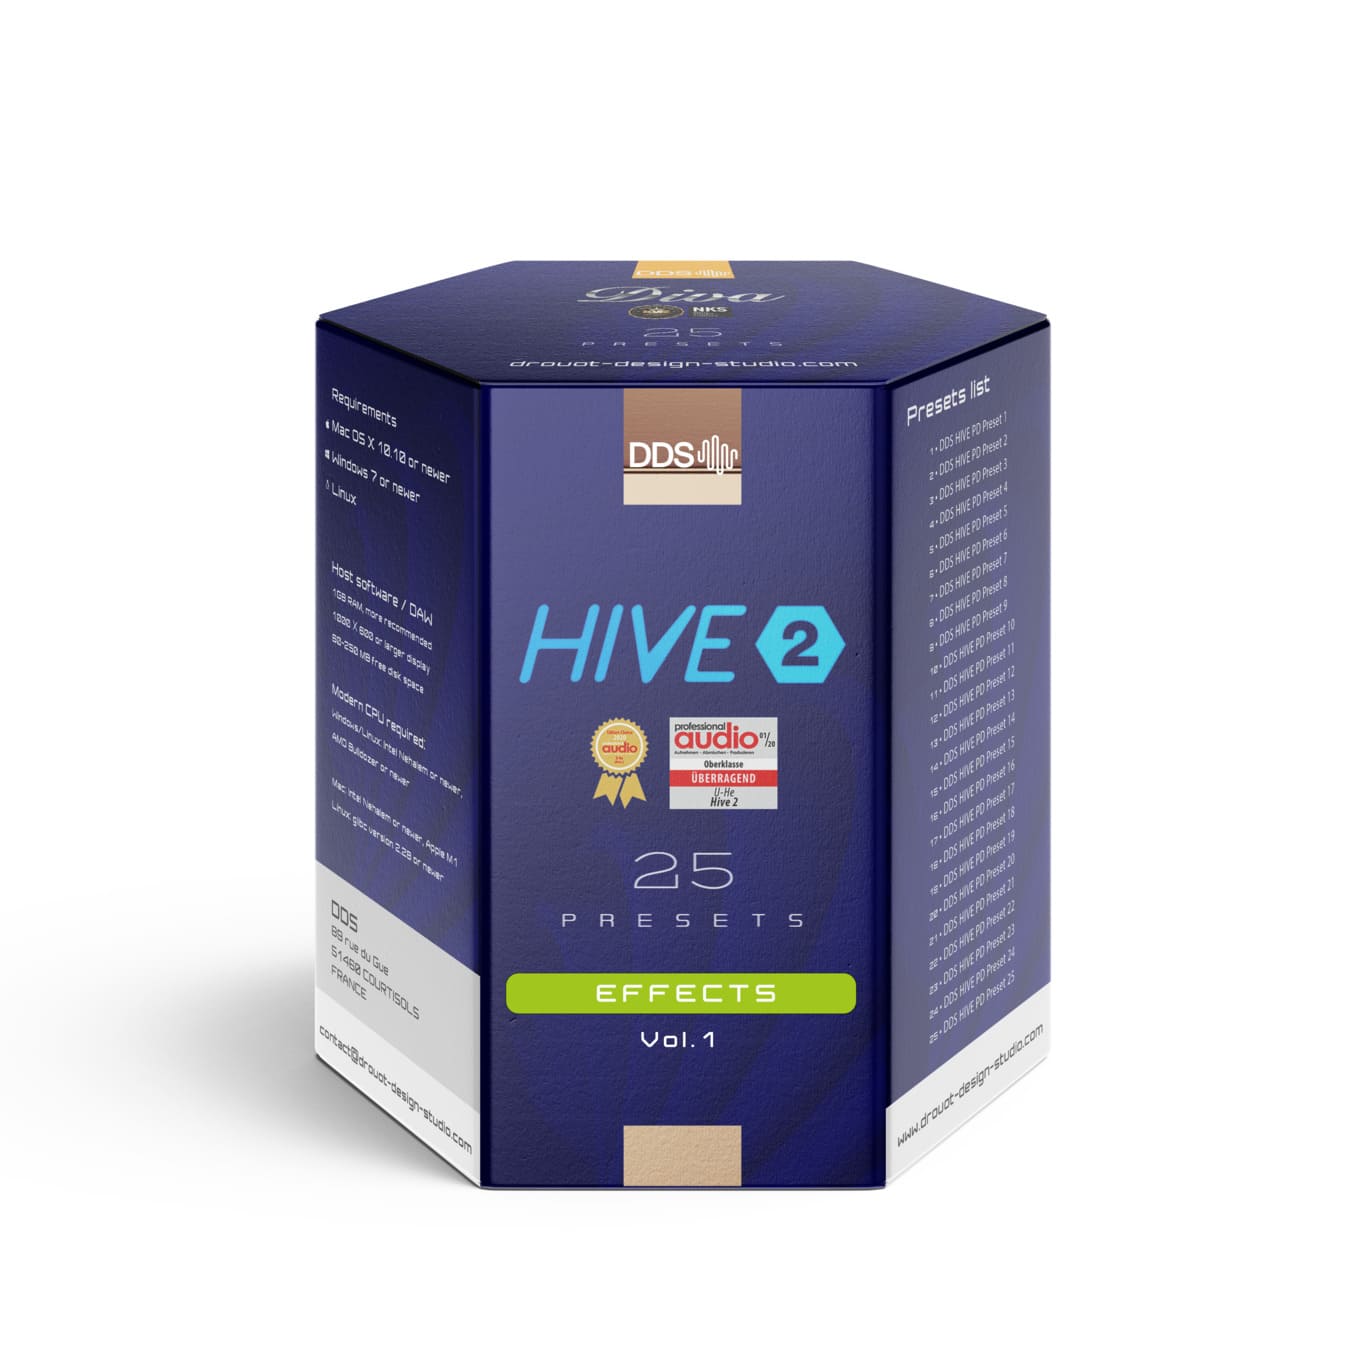 HIVE 2 - Effects - 25 presets pack - Vol. 1